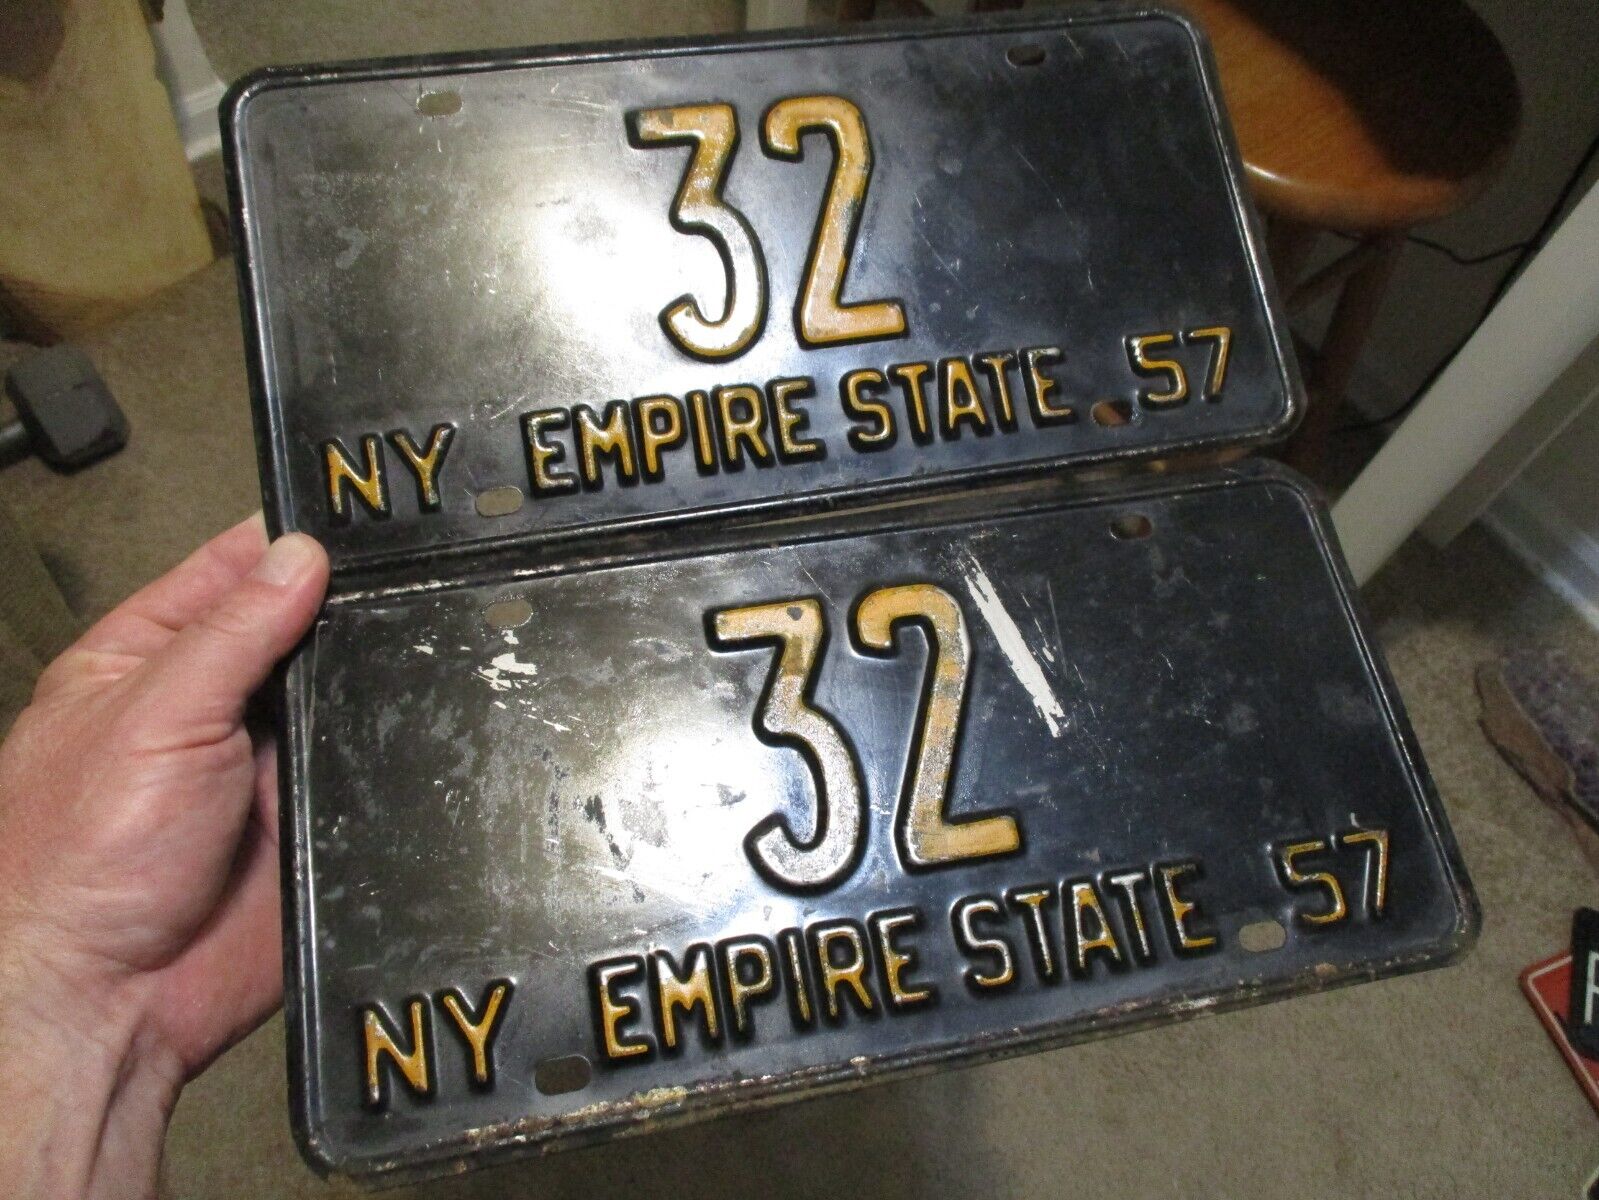 #32 RARE 1957 NEW YORK PAIR 2 digit LICENSE PLATES LOW # 32 EMPIRE STATE CHEVY